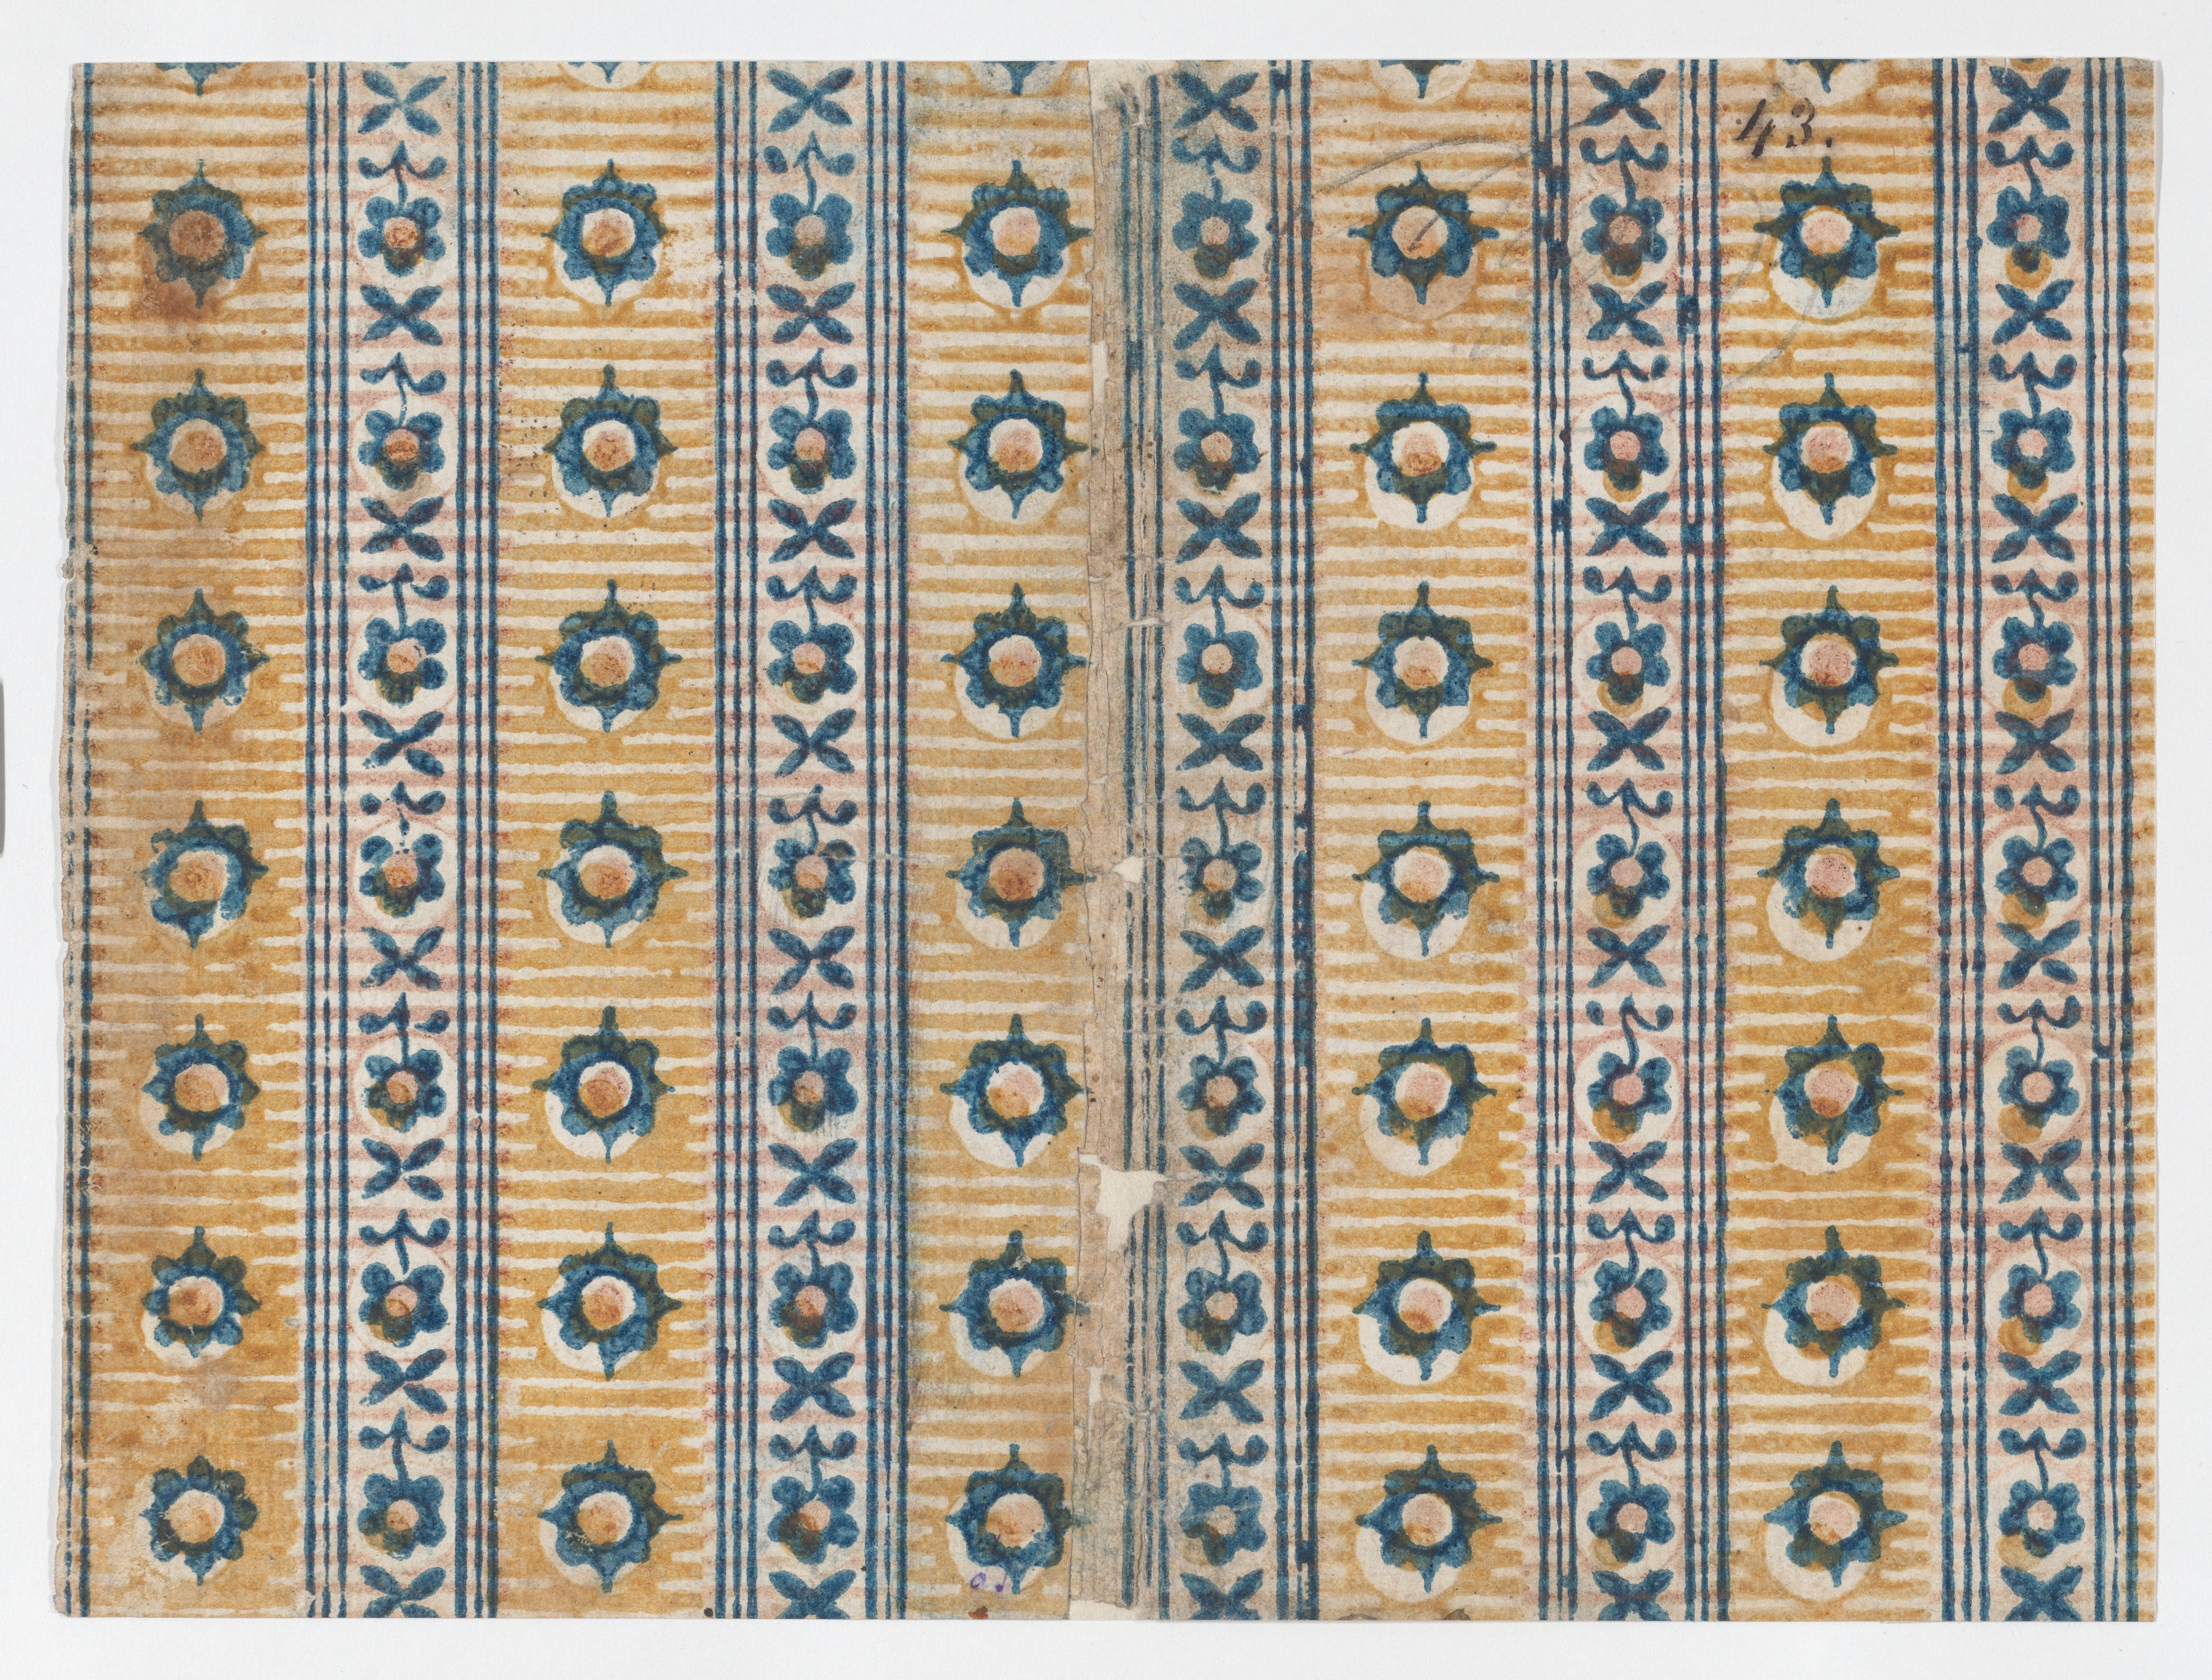 File Sheet With Five Borders With Floral And Striped Patterns Met Dp6657 Jpg Wikimedia Commons